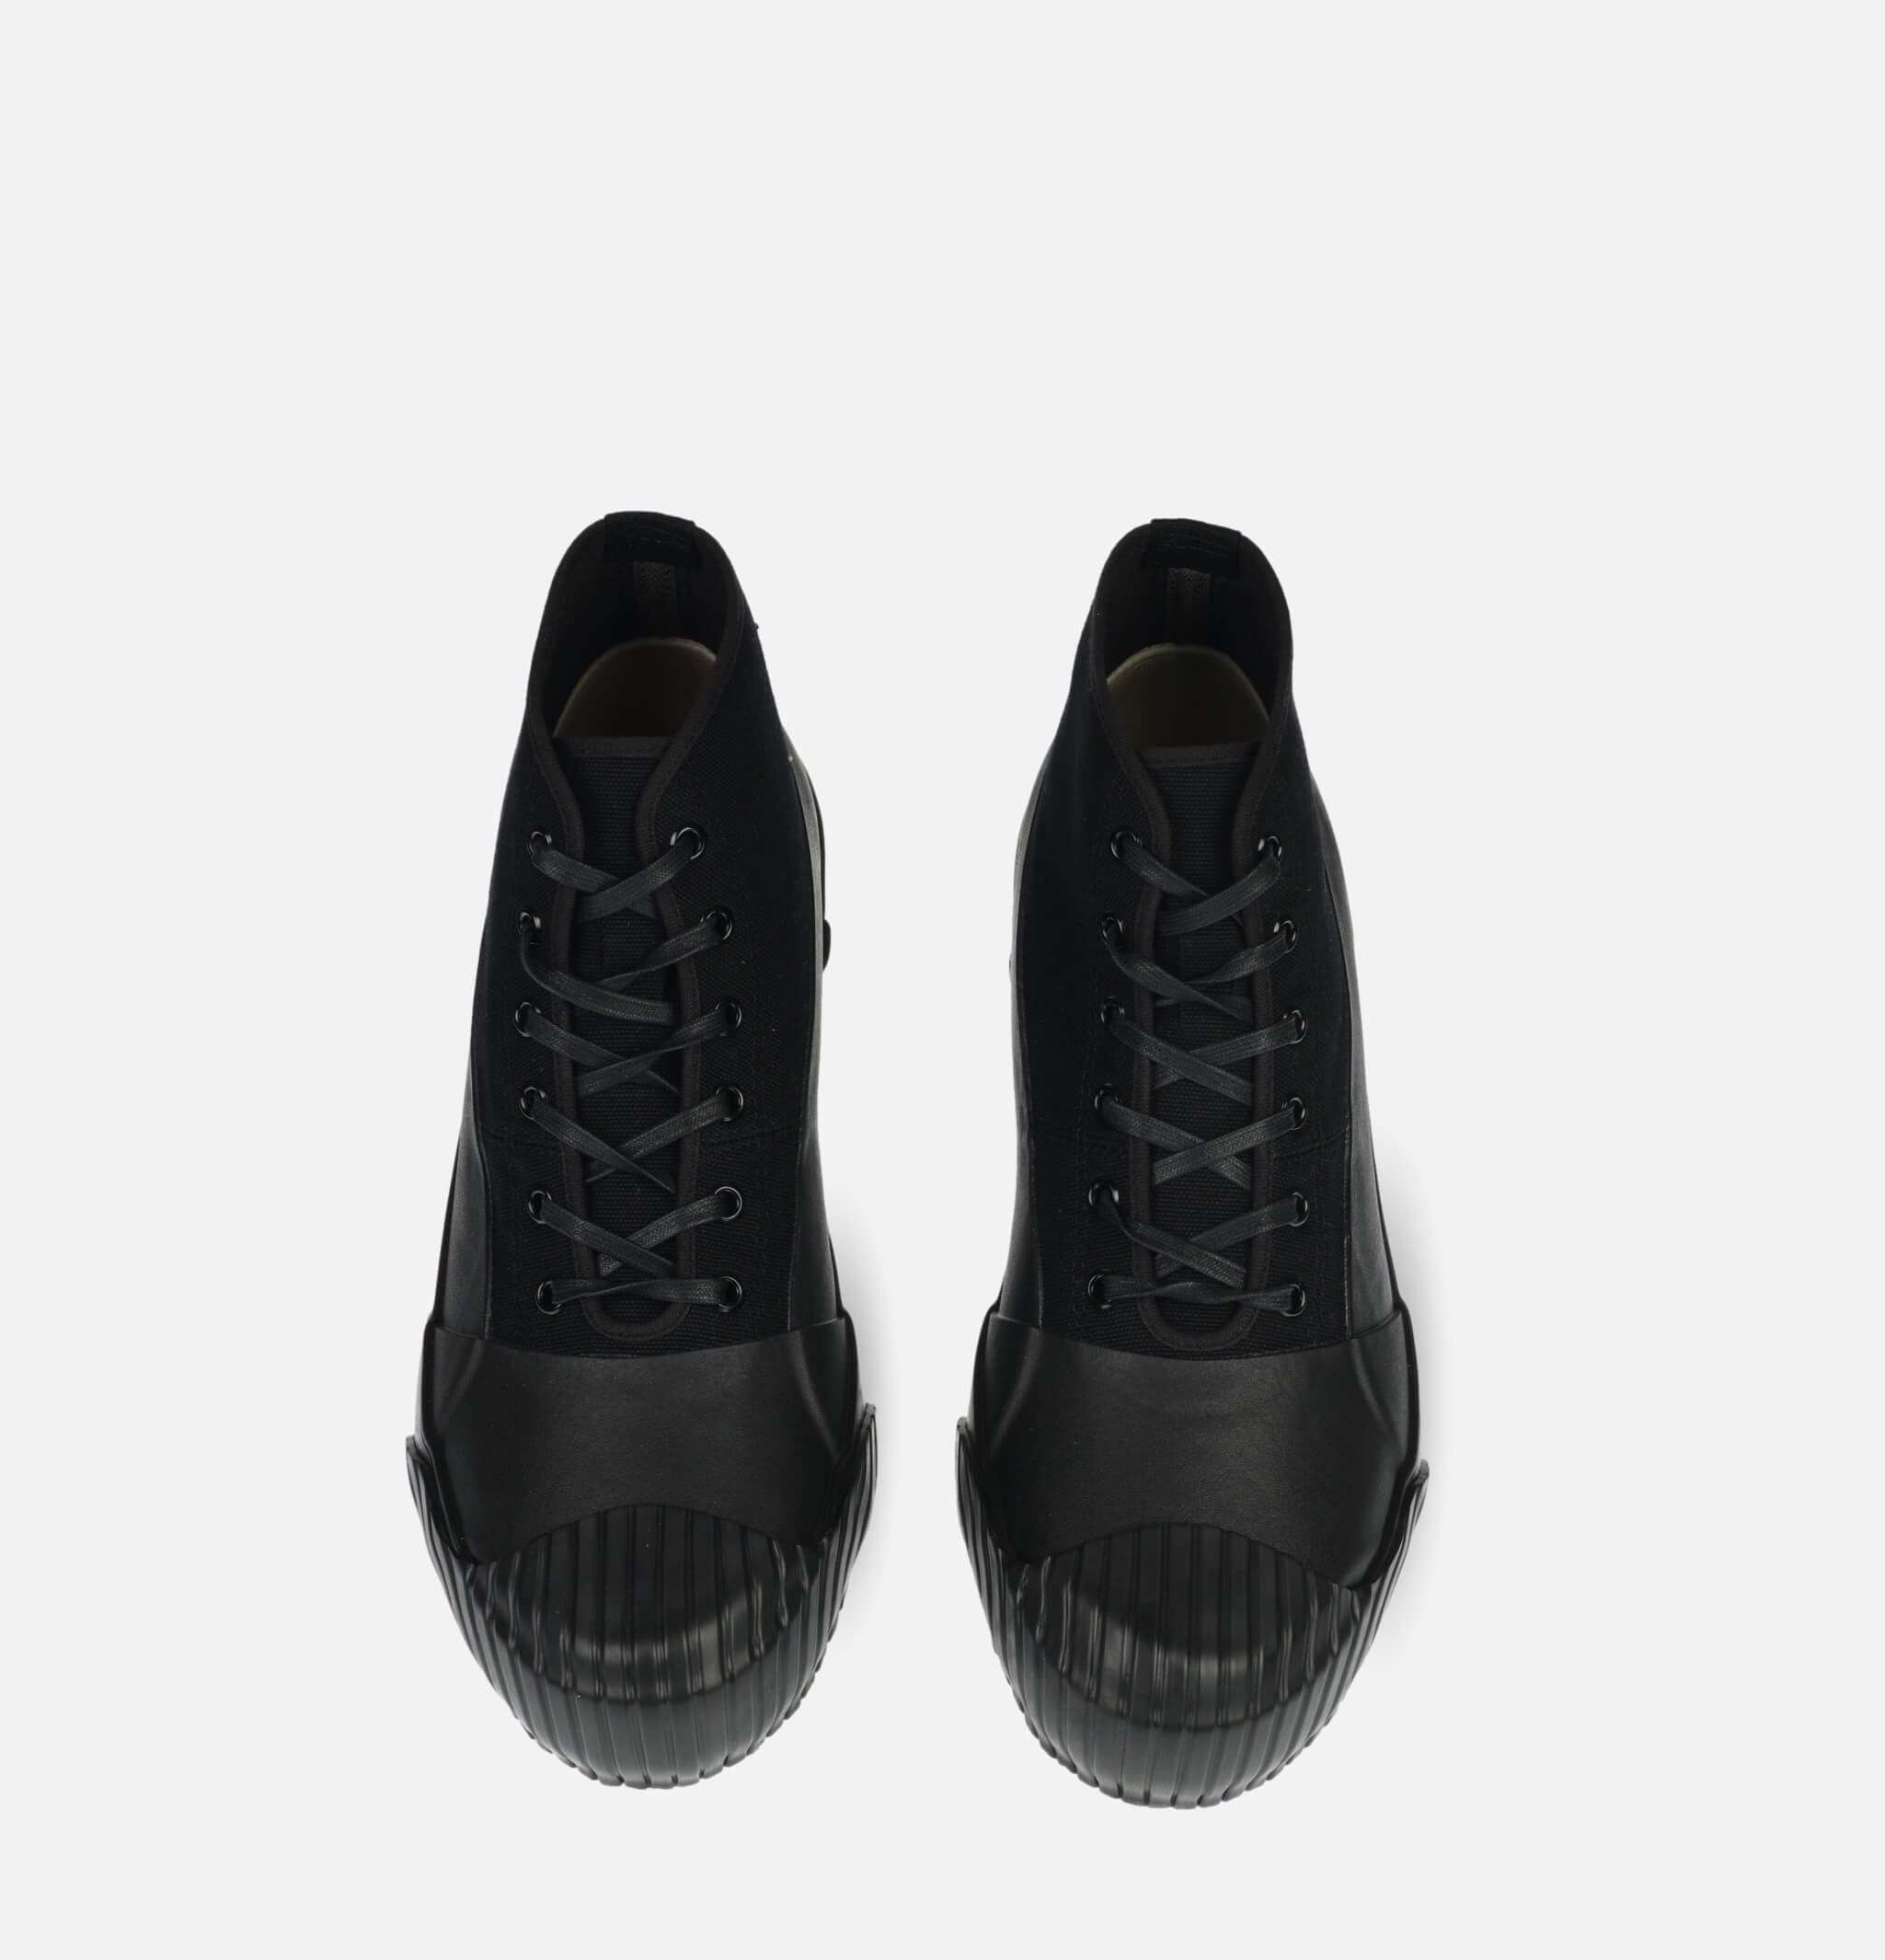 Chaussures Allweather Black